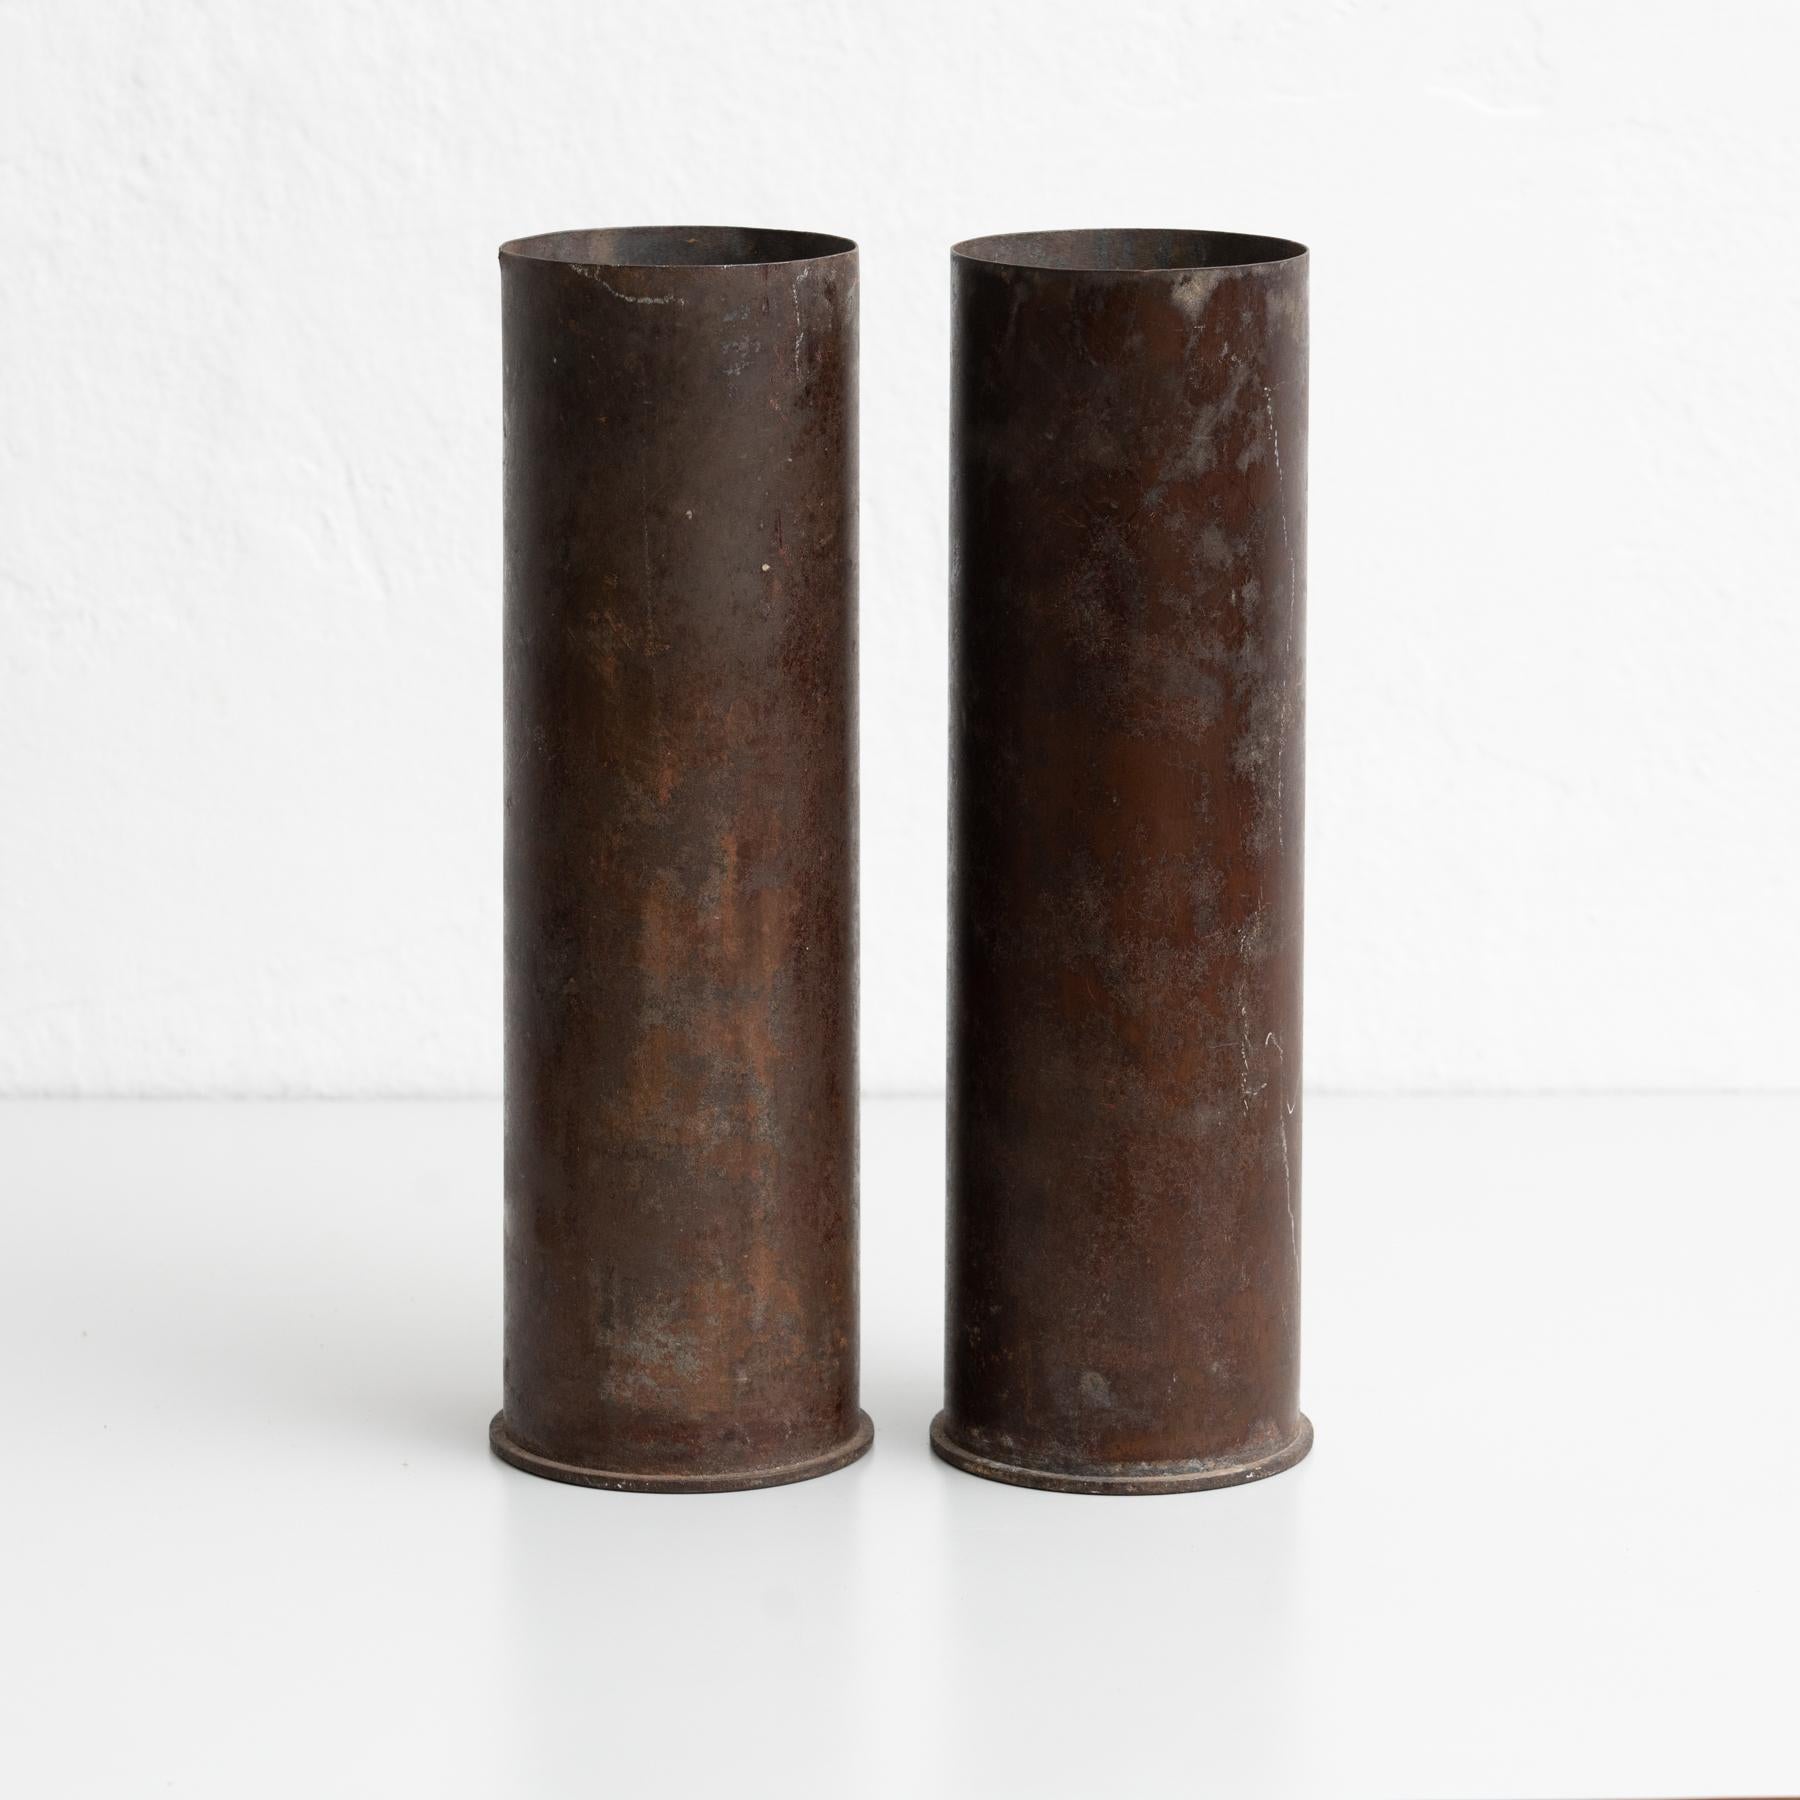 Set of two bronze mortar caps used as vases.

By unknown manufacturer from Spain, circa 1930.

In original condition, with minor wear consistent with age and use, preserving a beautiful patina.

Material:
Bronze

Dimensions:
 Ø 10.5 cm x H